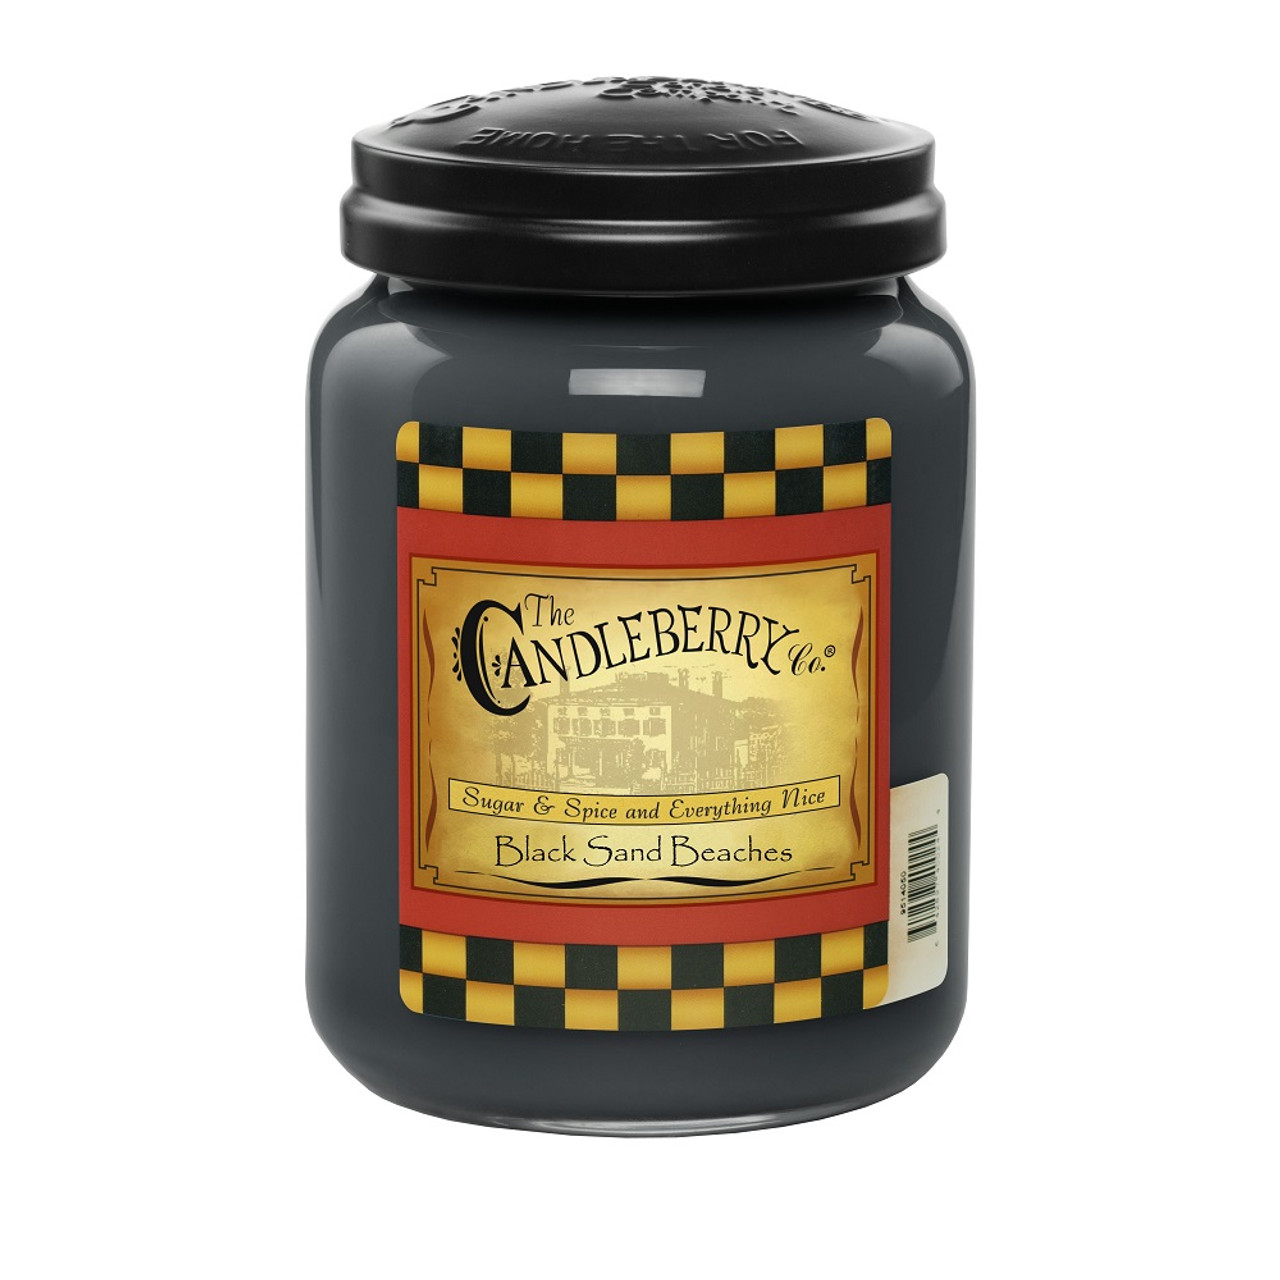 from Wade Gardens Candleberry Candles Wild Blackberries 26 oz 